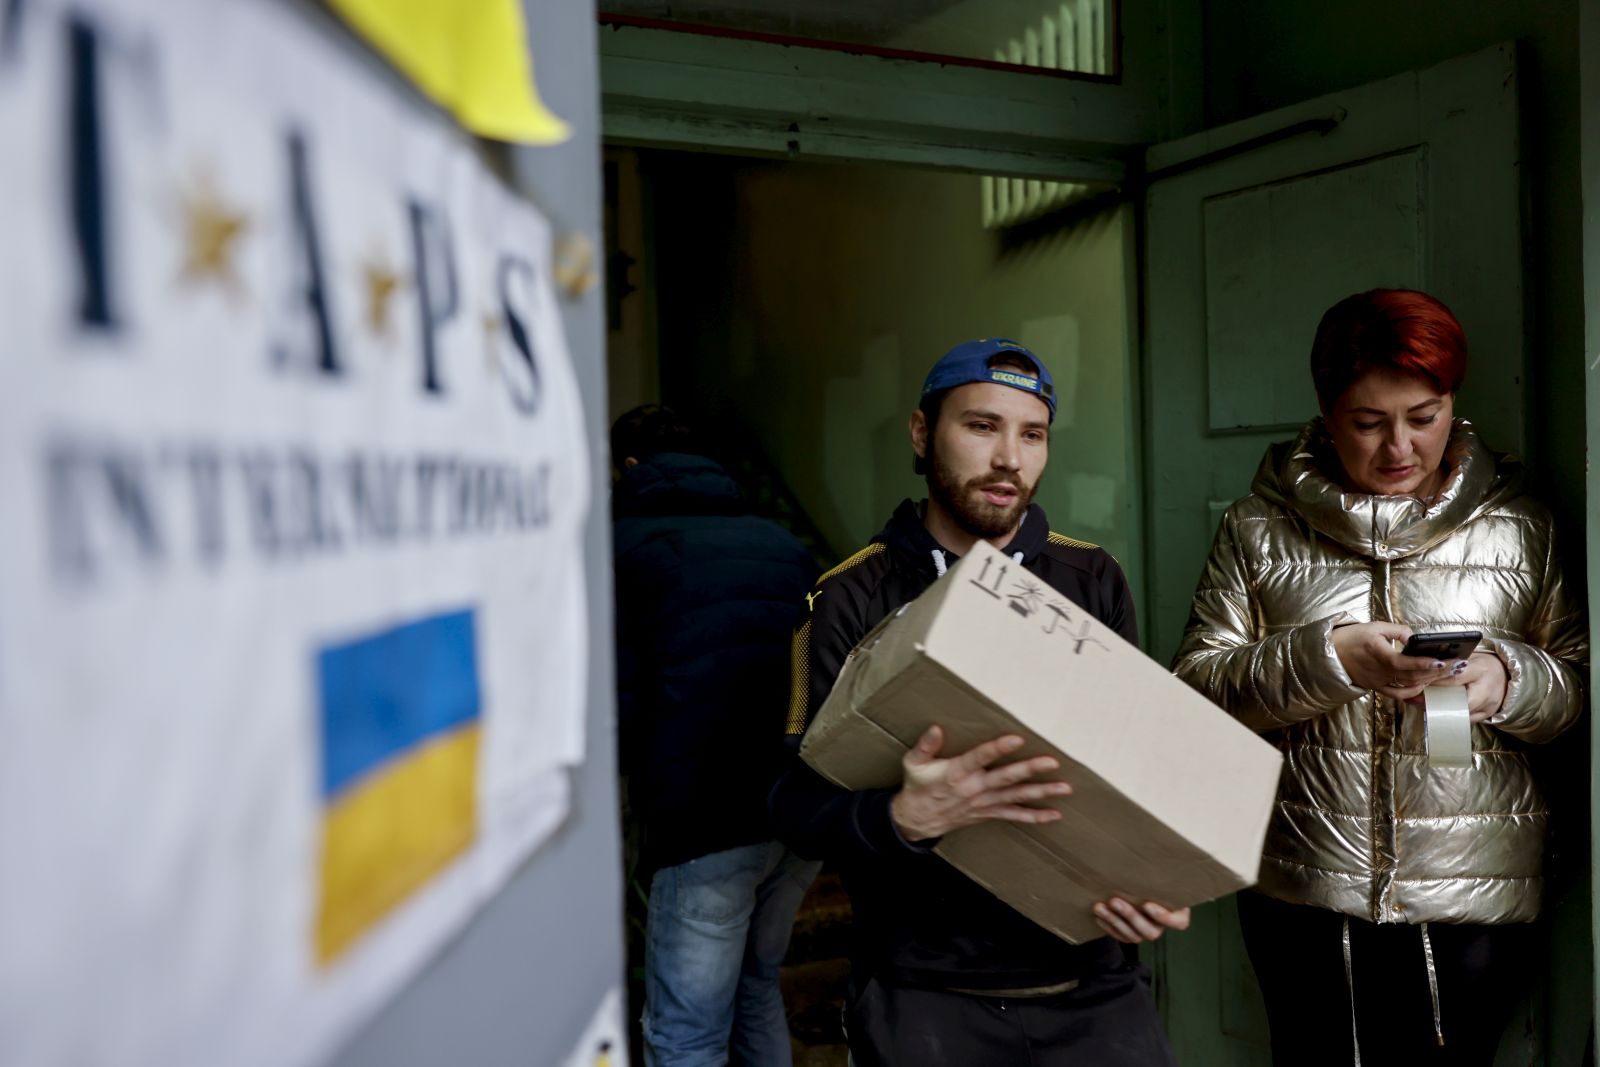 epa10266844 A volunteer carries food at a help center in Dnipro, Ukraine, 26 October 2022. More than 1,000 volunteers of the center organise and distribute food, medicine and other supplies to armed forces at the frontline and also to civilians. Russian troops on 24 February entered Ukrainian territory, starting a conflict that has provoked destruction and a humanitarian crisis.  EPA/HANNIBAL HANSCHKE